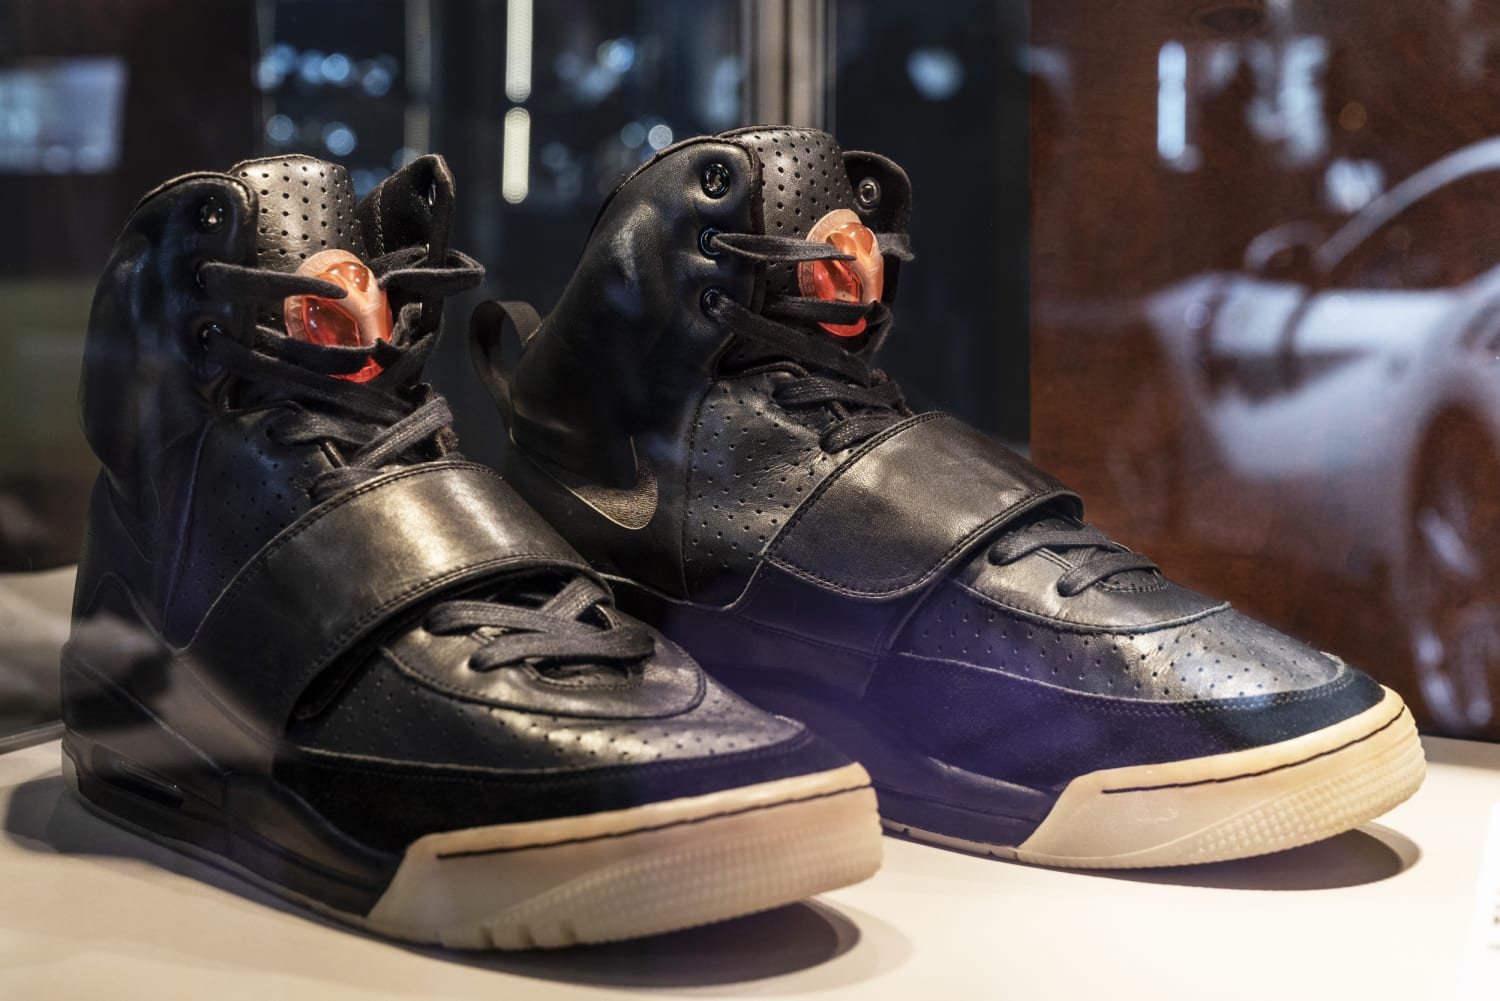 Kanye West sneakers fetch record $1.8 million at private sale